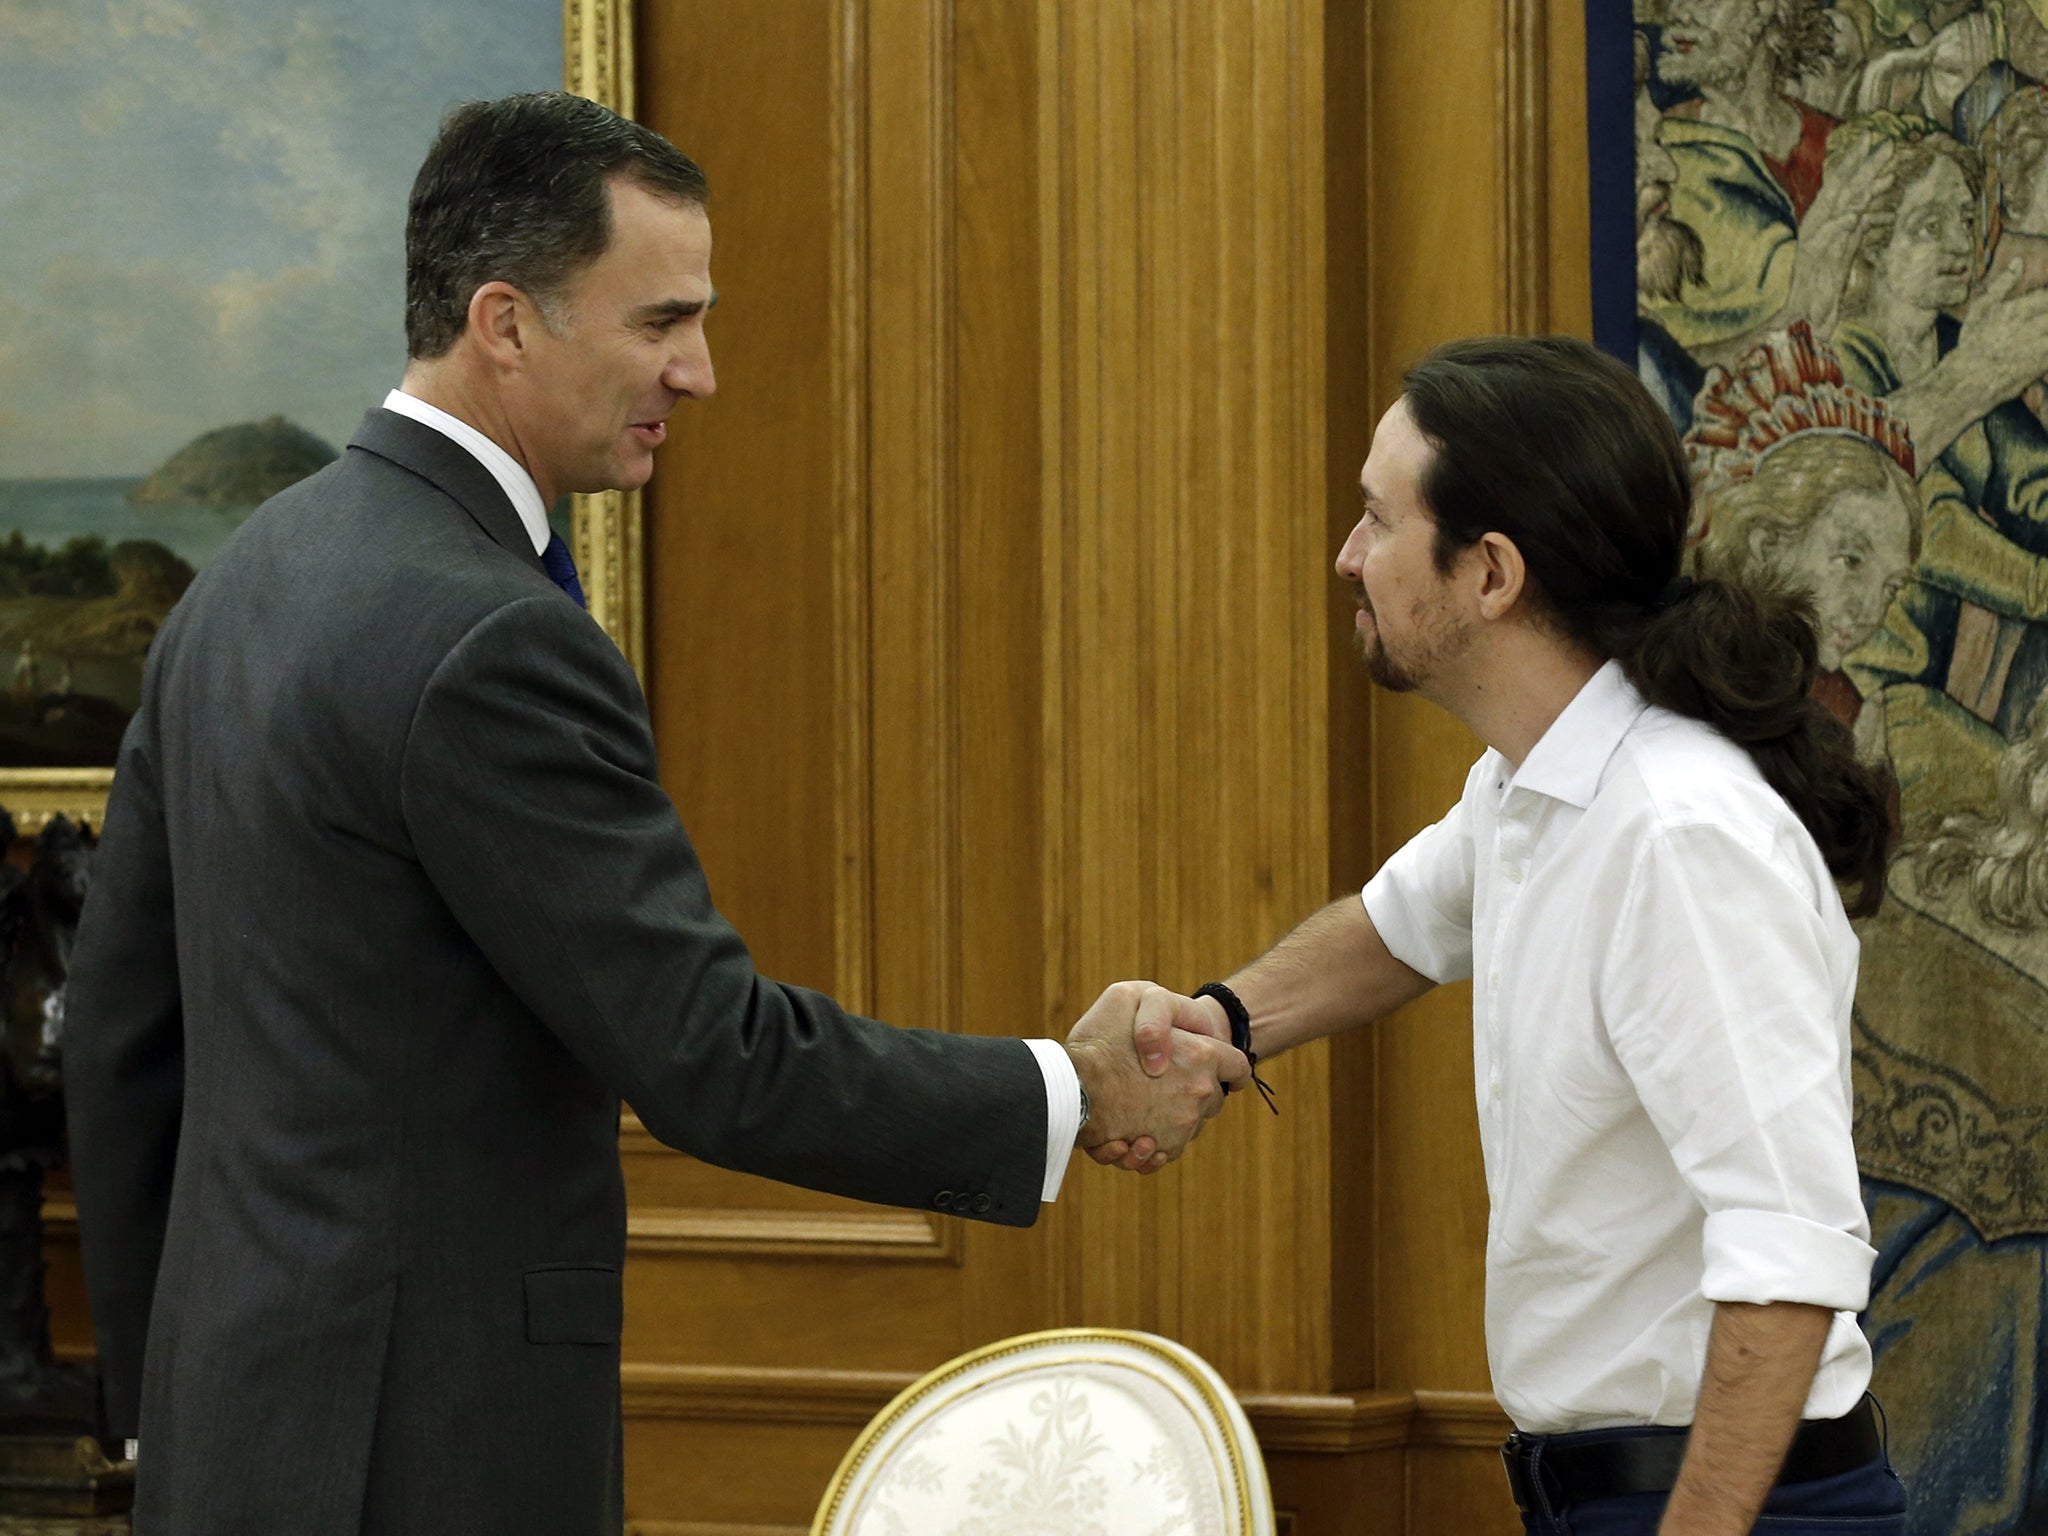 Spain's King Felipe VI, left, shakes hands with Podemos party leader Pablo Iglesias before a meeting at the Zarzuela Palace in Madrid